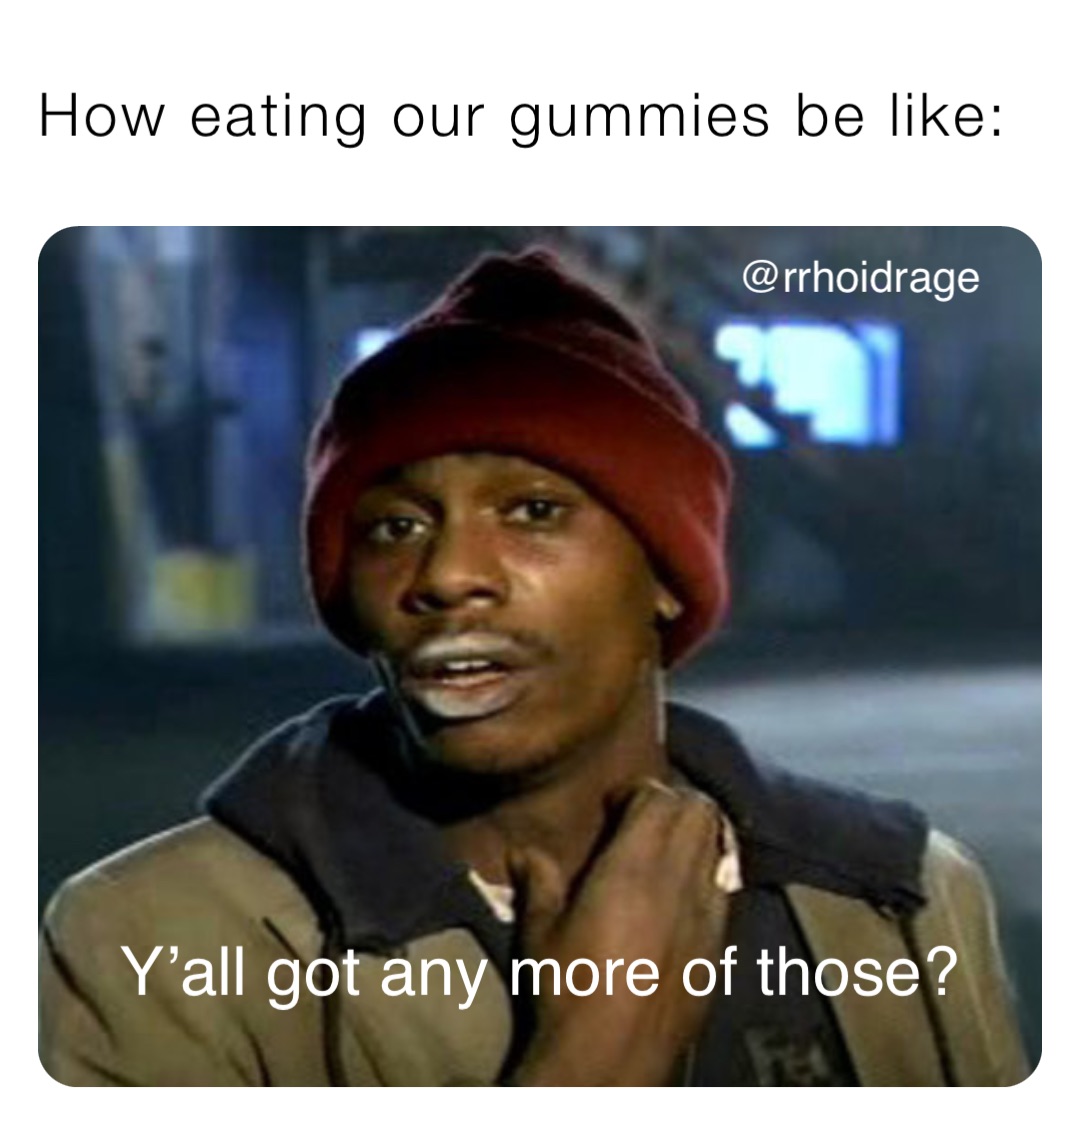 How eating our gummies be like: Y’all got any more of those?